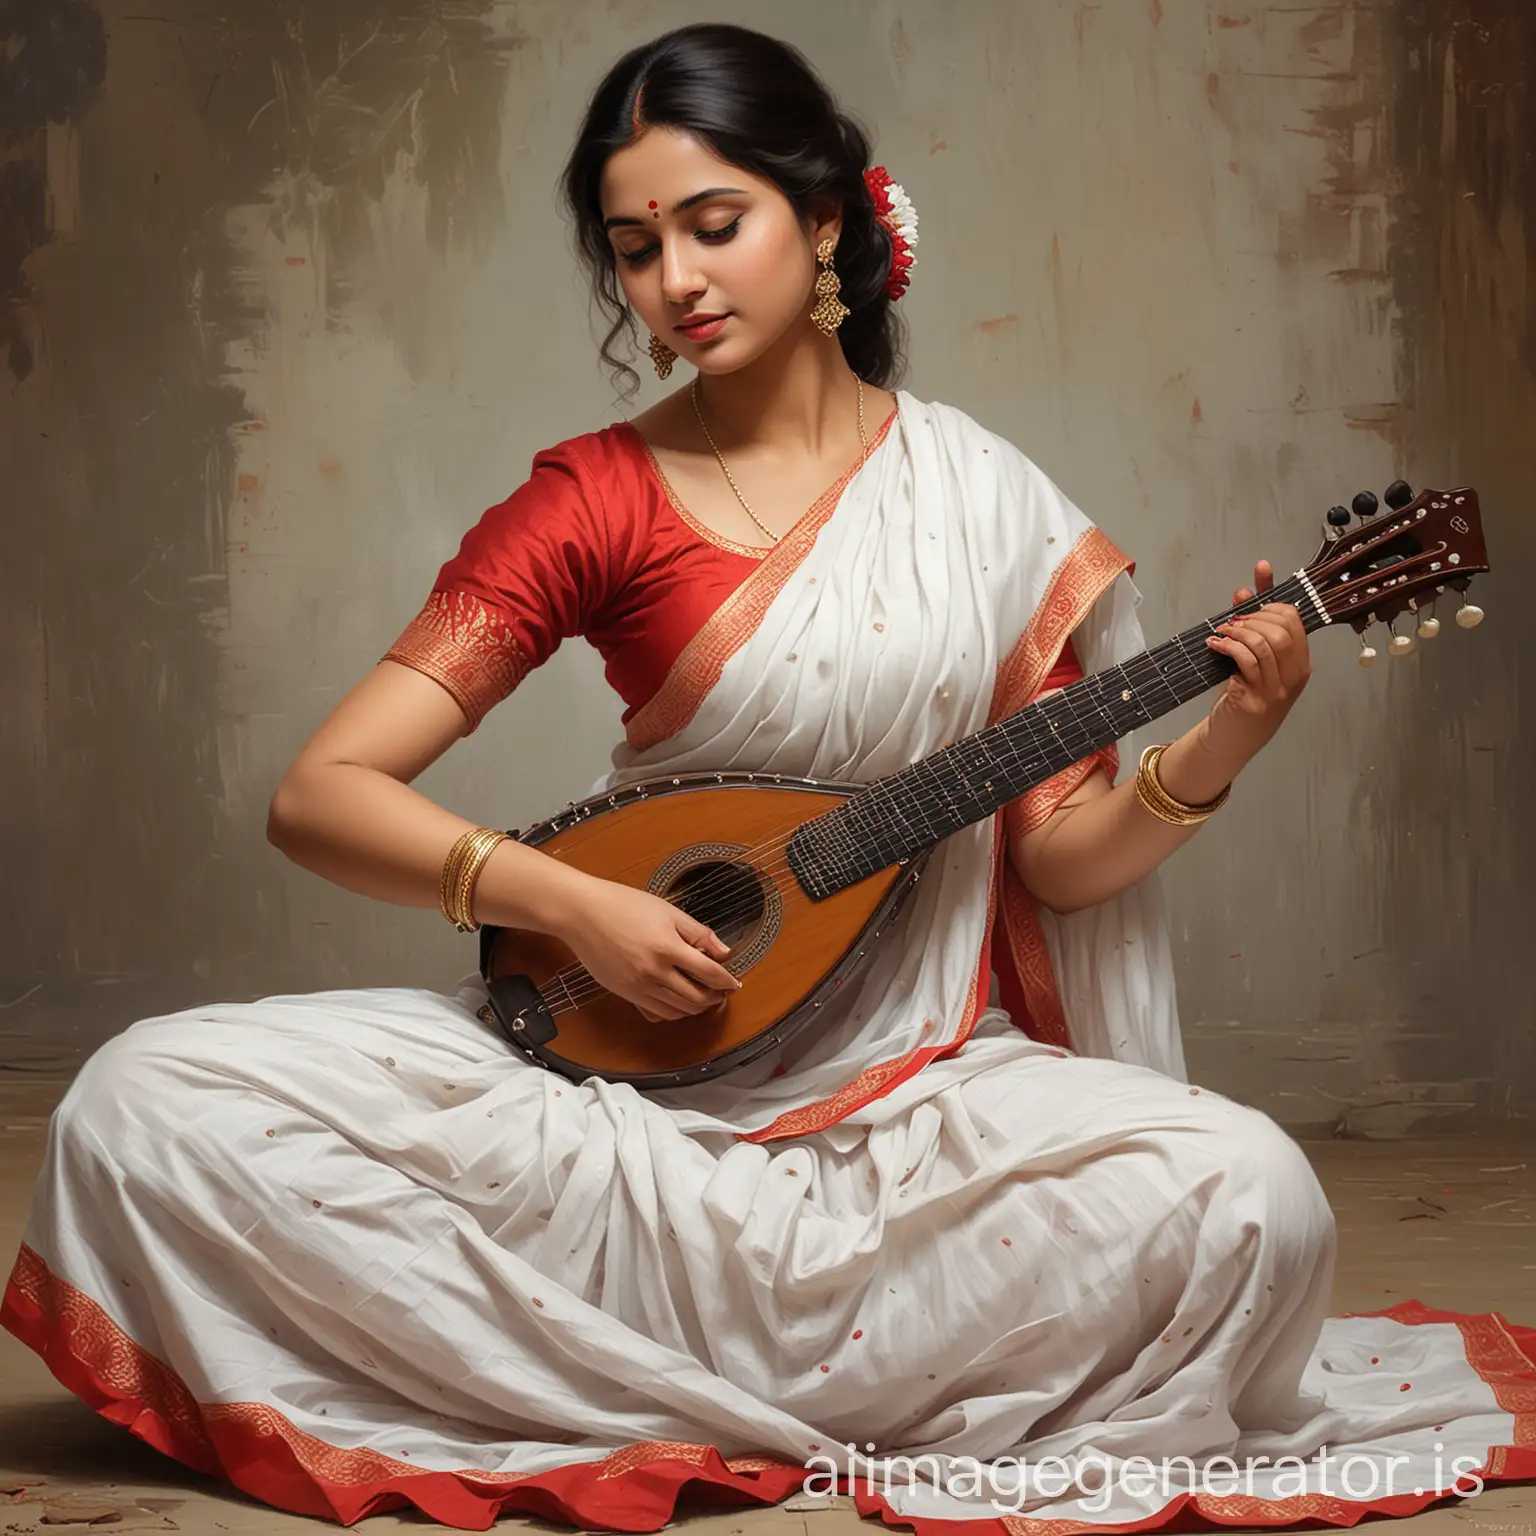 generate a realistic oil painting image of a full figure girl siting with , playing veena wearing a white saree and red blouse